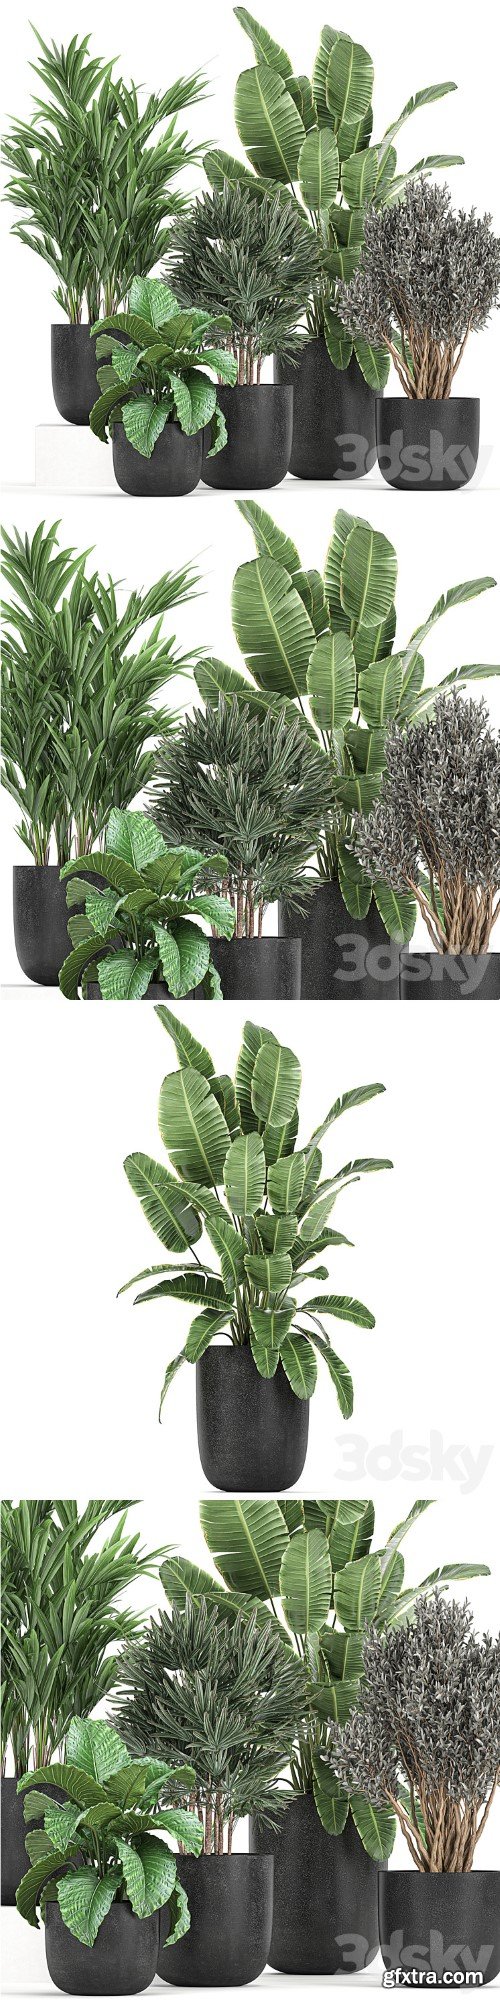 A collection of small plants and bushes Banana palm, olive, Rapeseed, Alokasia in black pots. Set 813.